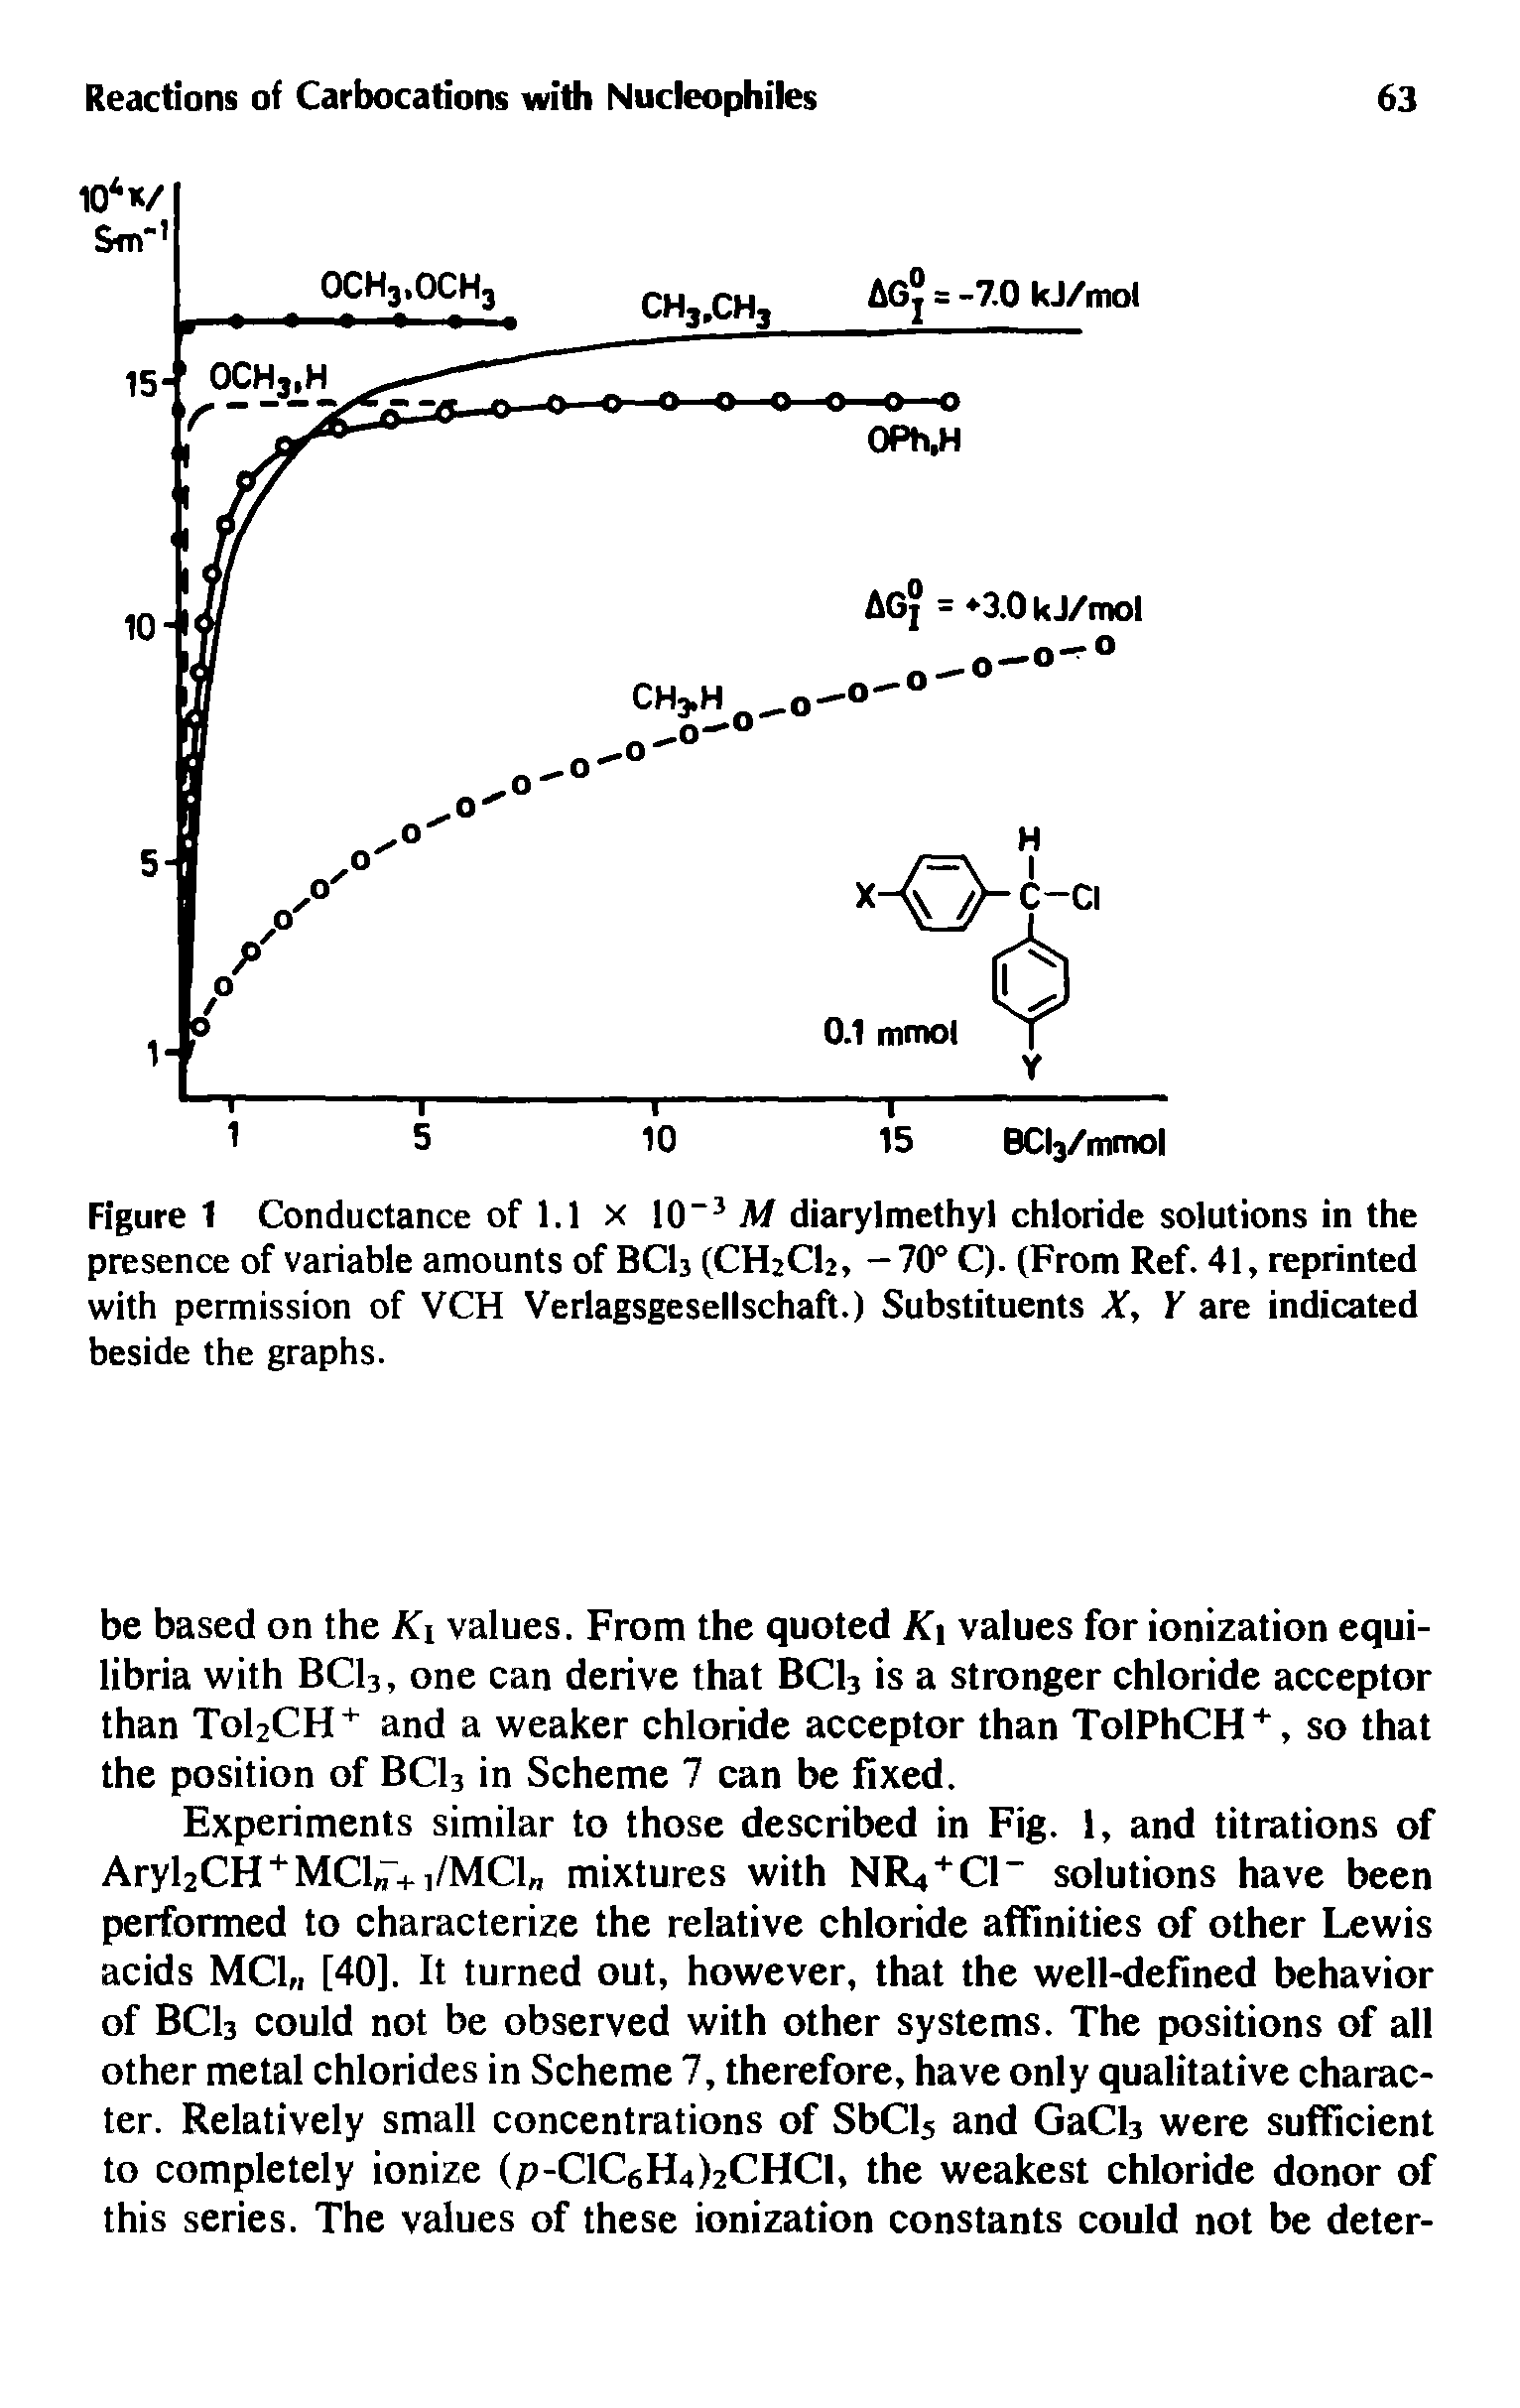 Figure 1 Conductance of 1.1 x 10-3 M diarylmethyl chloride solutions in the presence of variable amounts of BCI3 (CH2C12, —70° C). (From Ref. 41, reprinted with permission of VCH Verlagsgesellschaft.) Substituents X, Y are indicated beside the graphs.